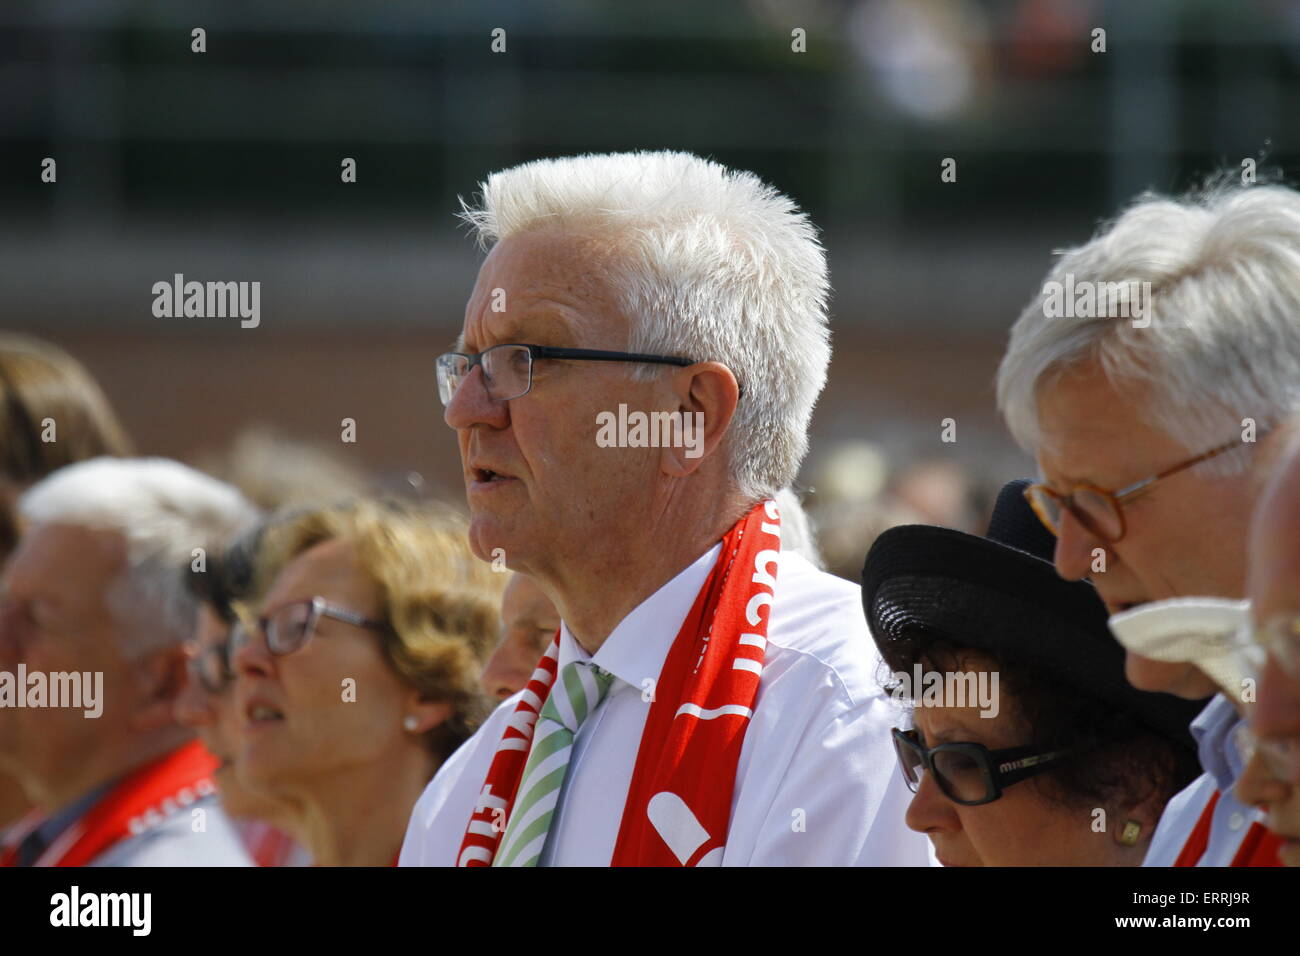 Stuttgart, Germany. 07th June, 2015. A close-up of Winfried Kretschmann, the Minister-President of Baden-Württemberg, at the closing ceremony of the 35th German Protestant Church Congress. © Michael Debets/Pacific Press/Alamy Live News Stock Photo